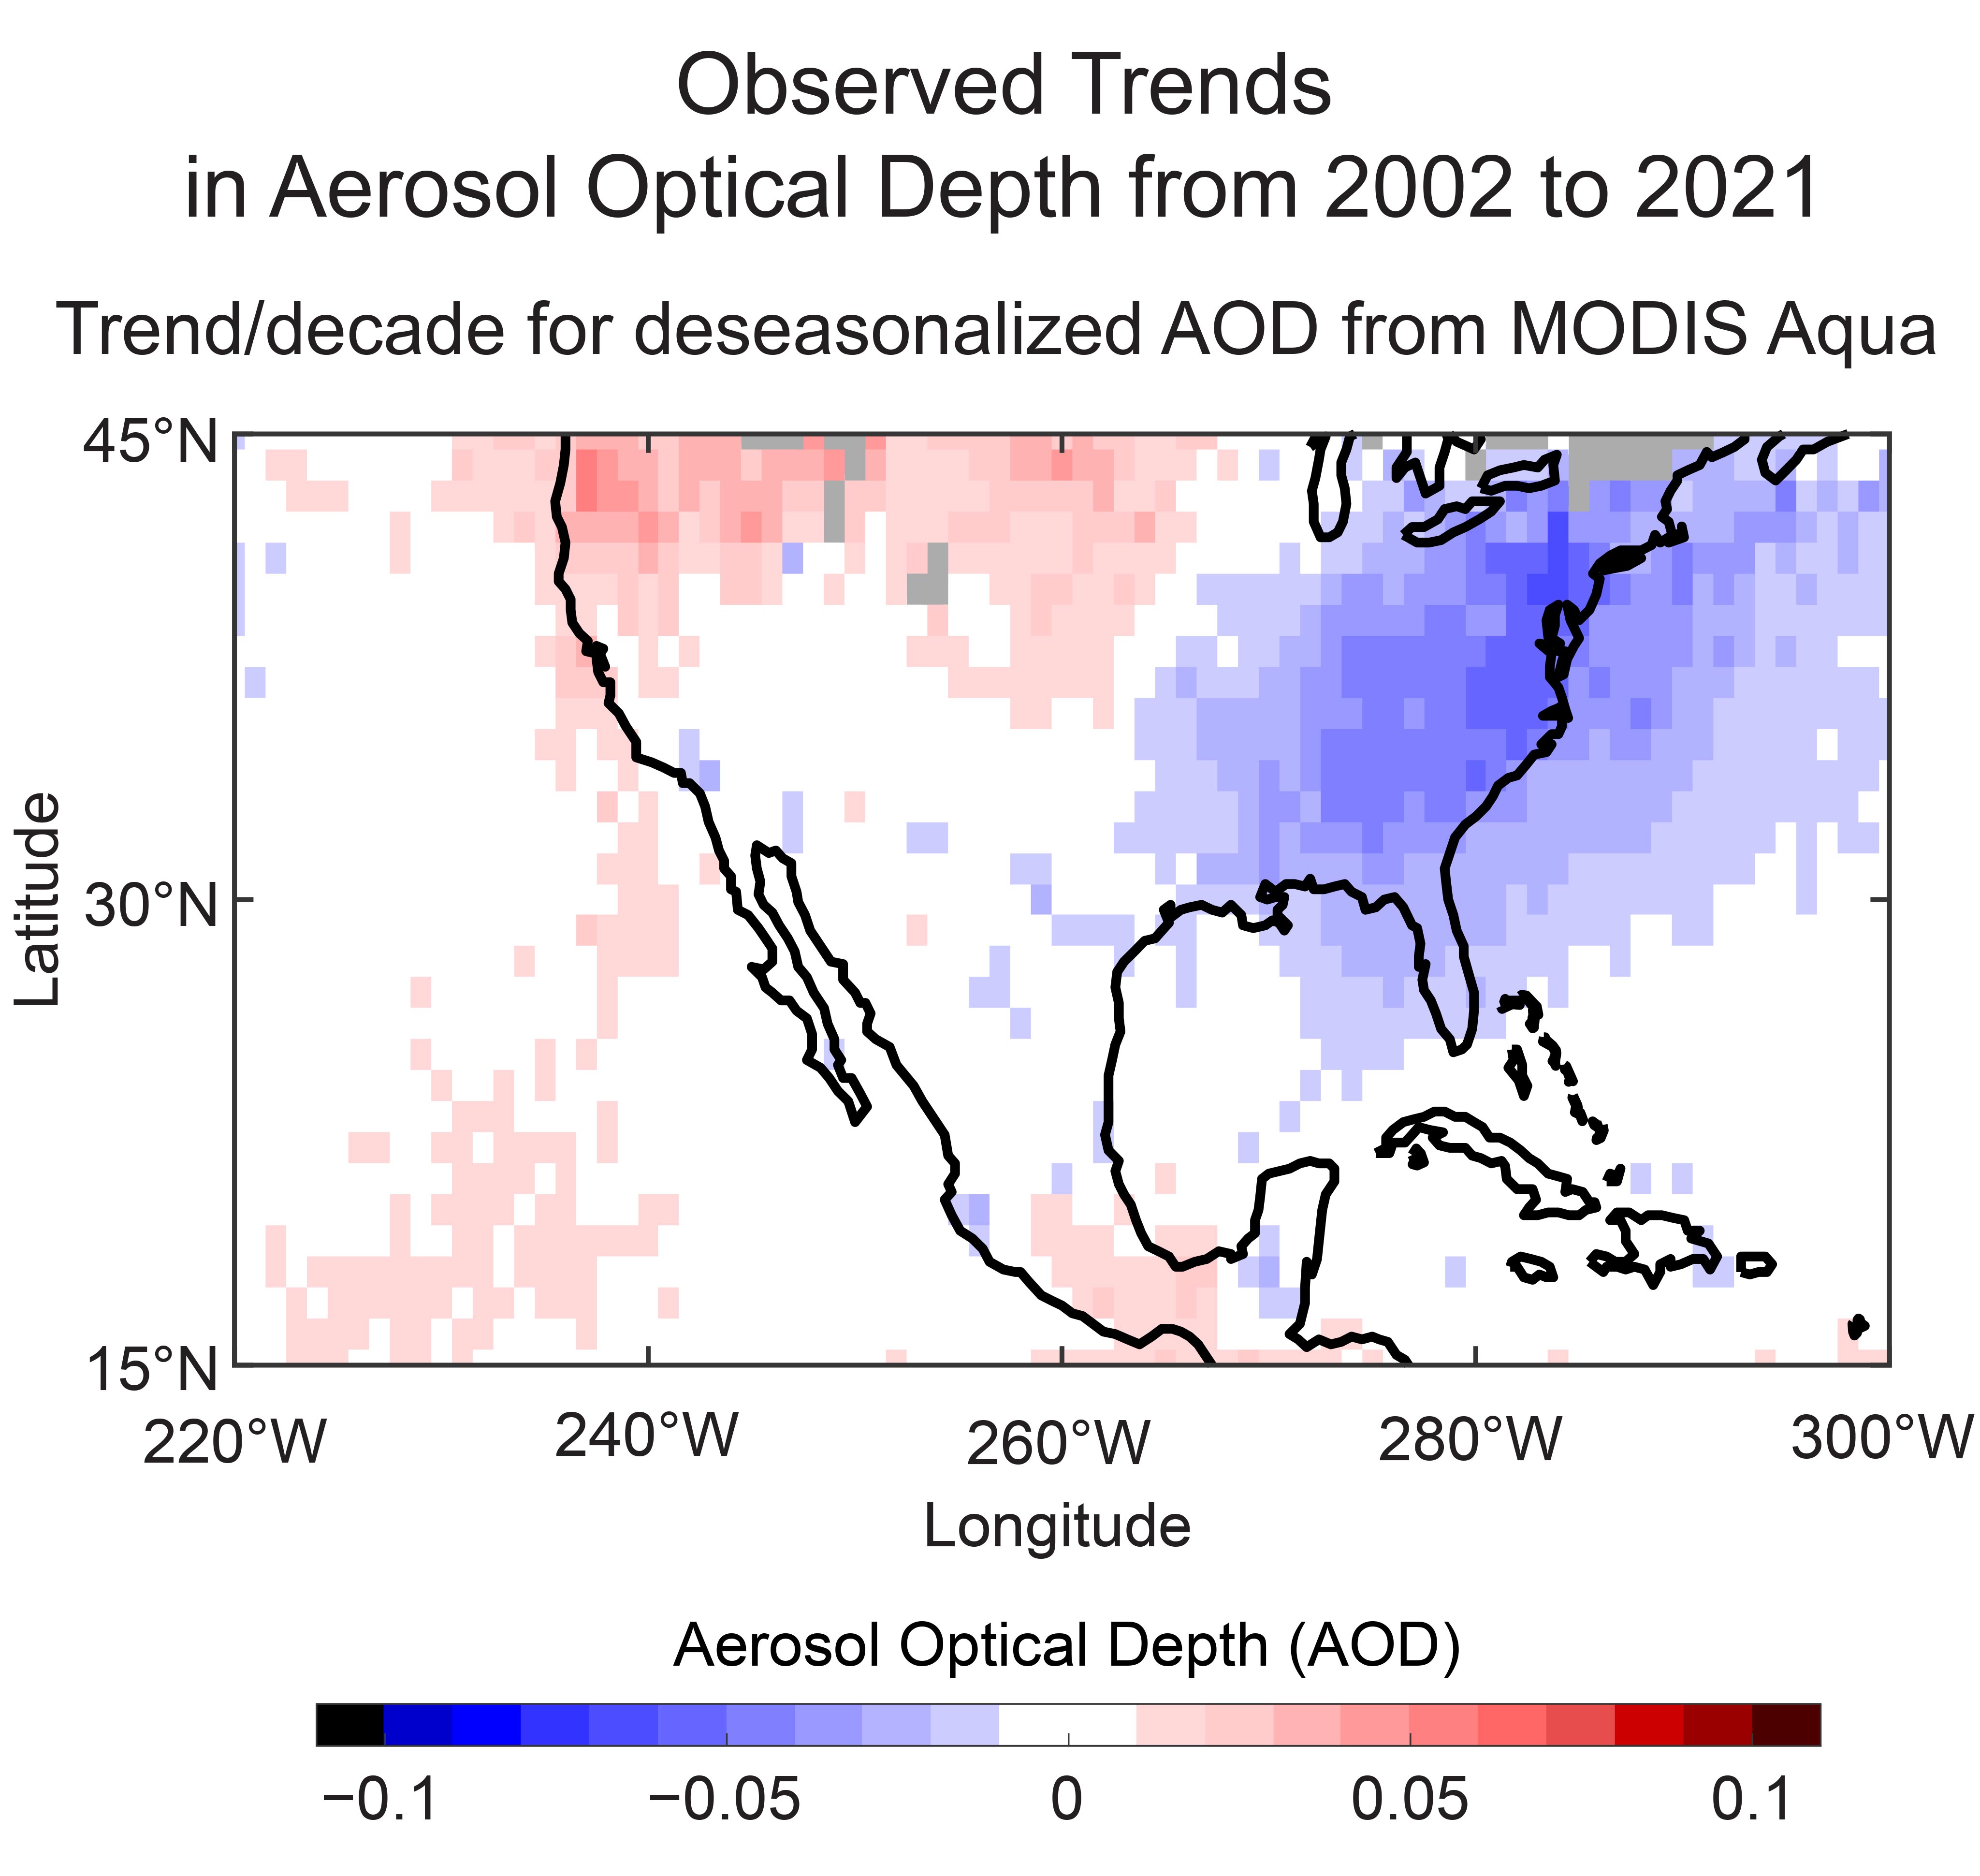 Observed Trends in Aerosol Optical Depth from 2002 to 2021